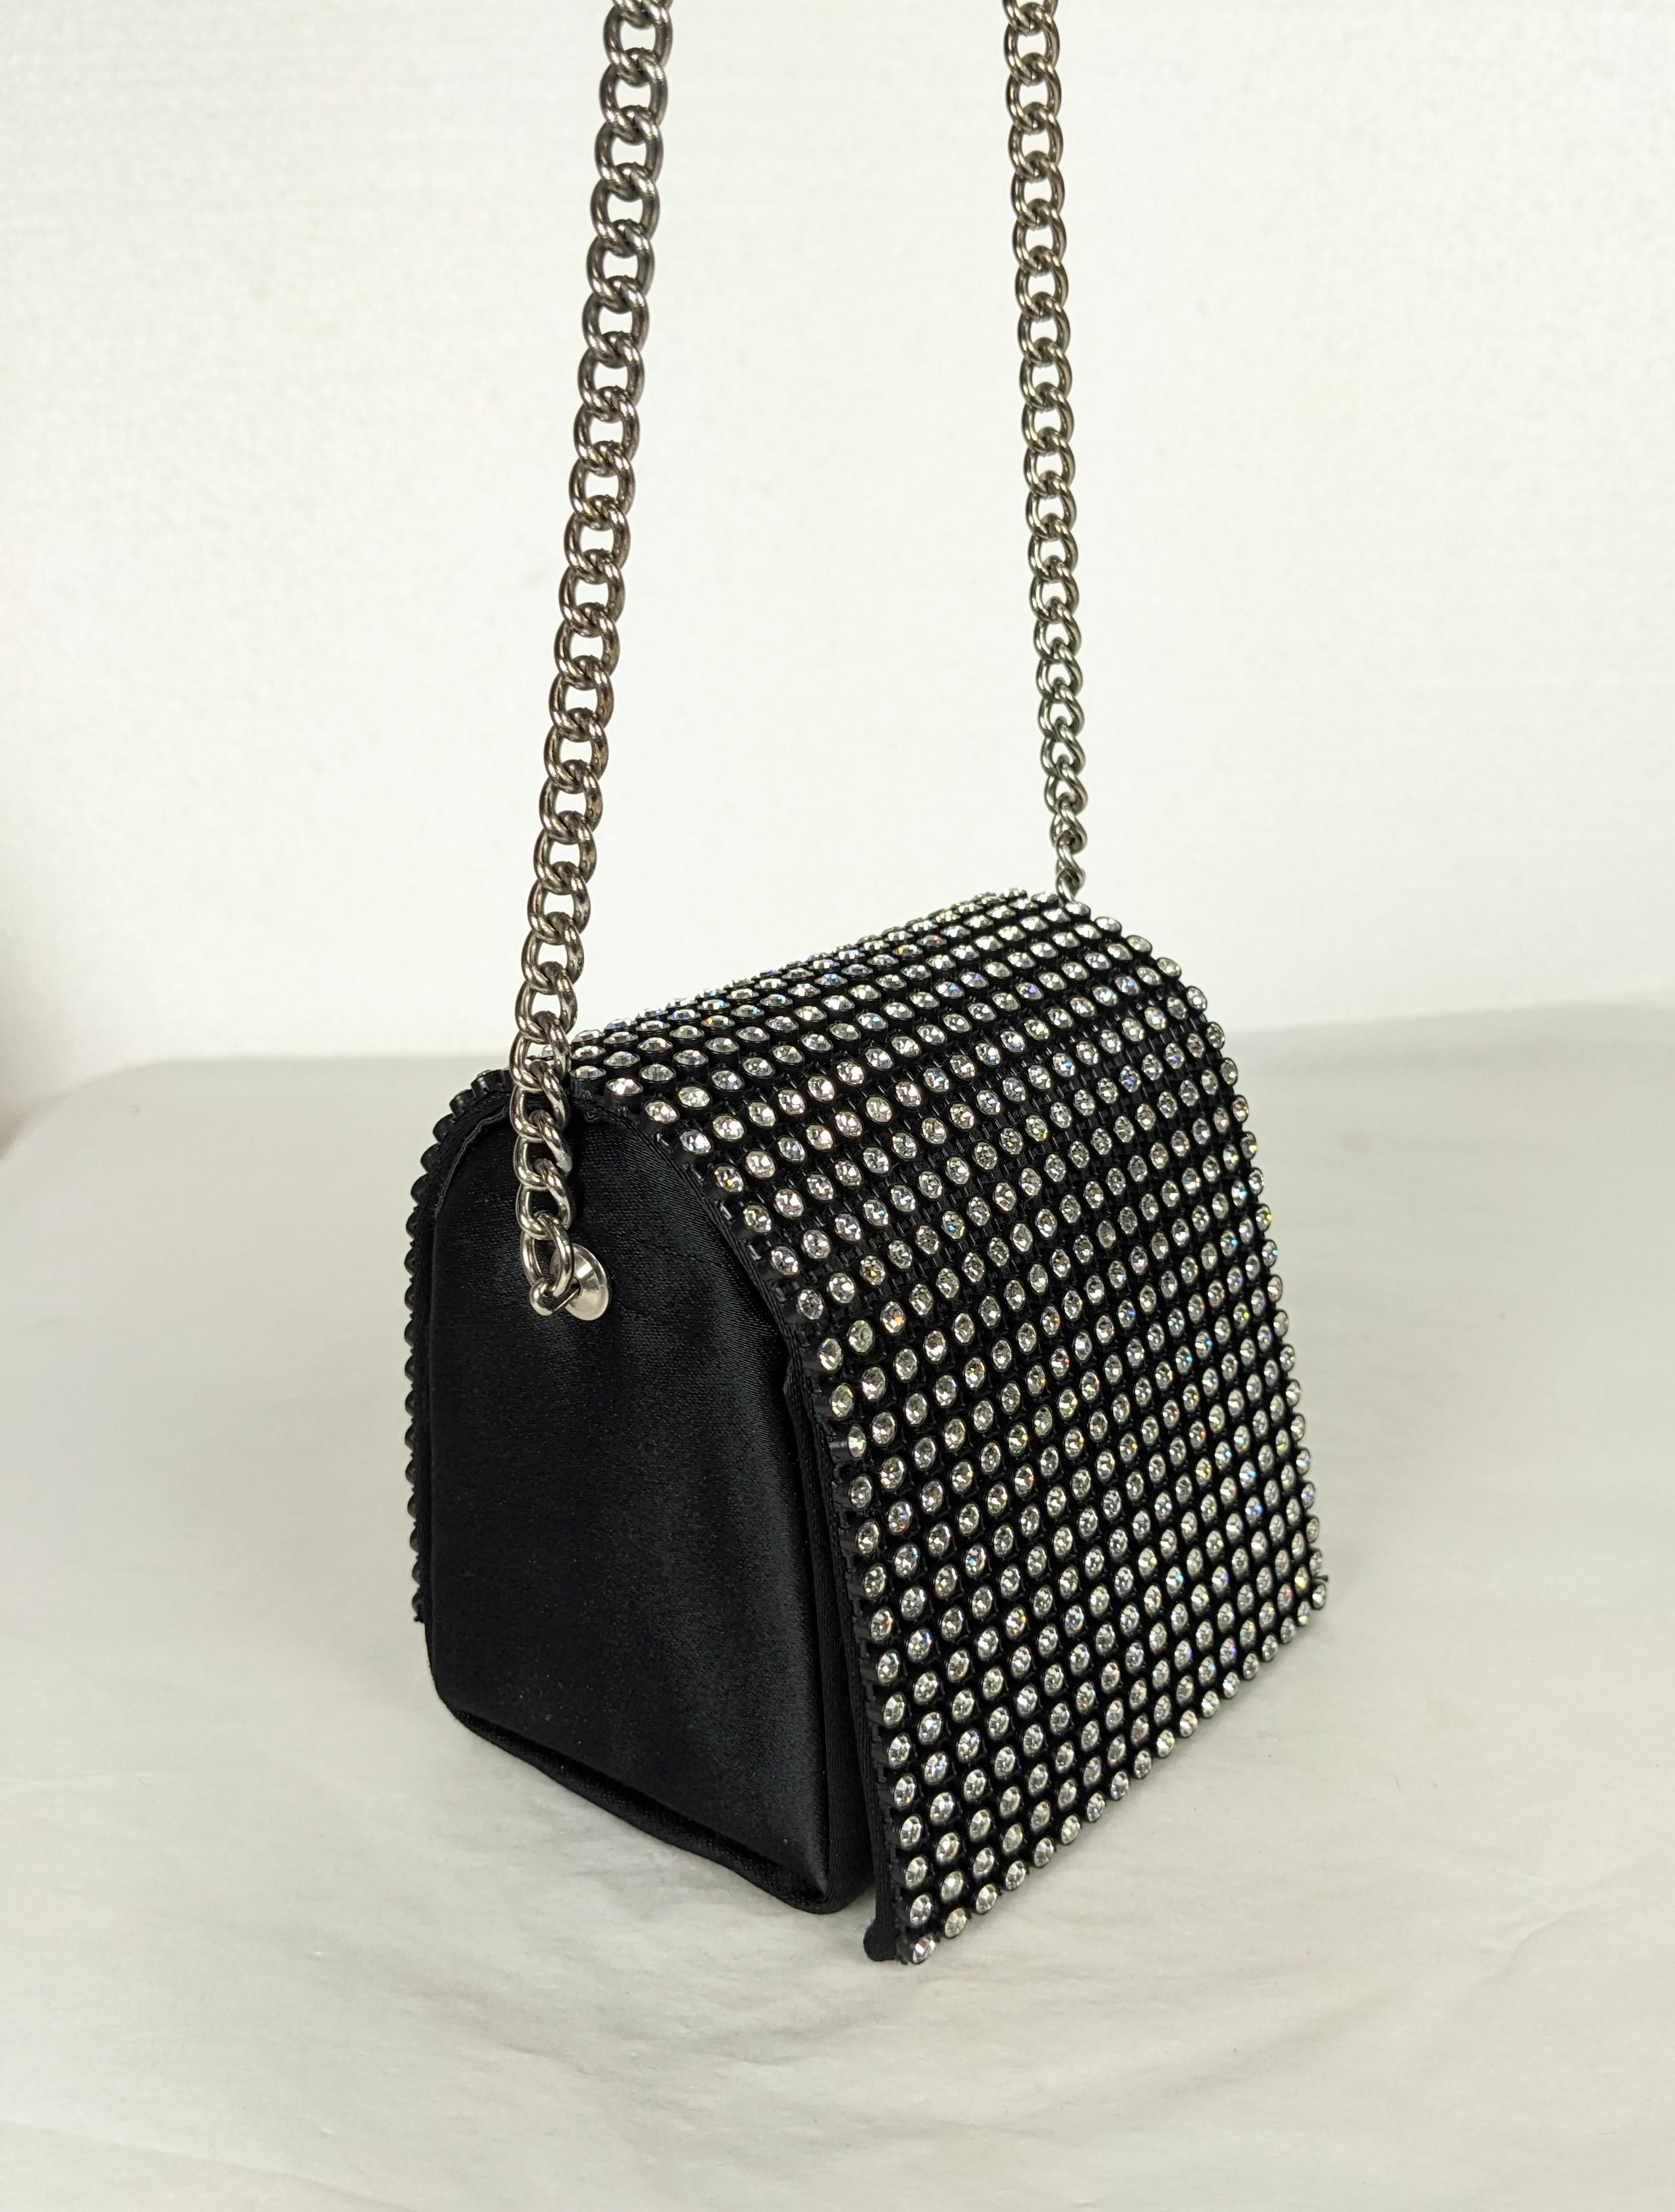 Arnold Scassi Pave Cube Novelty Bag In Good Condition For Sale In New York, NY